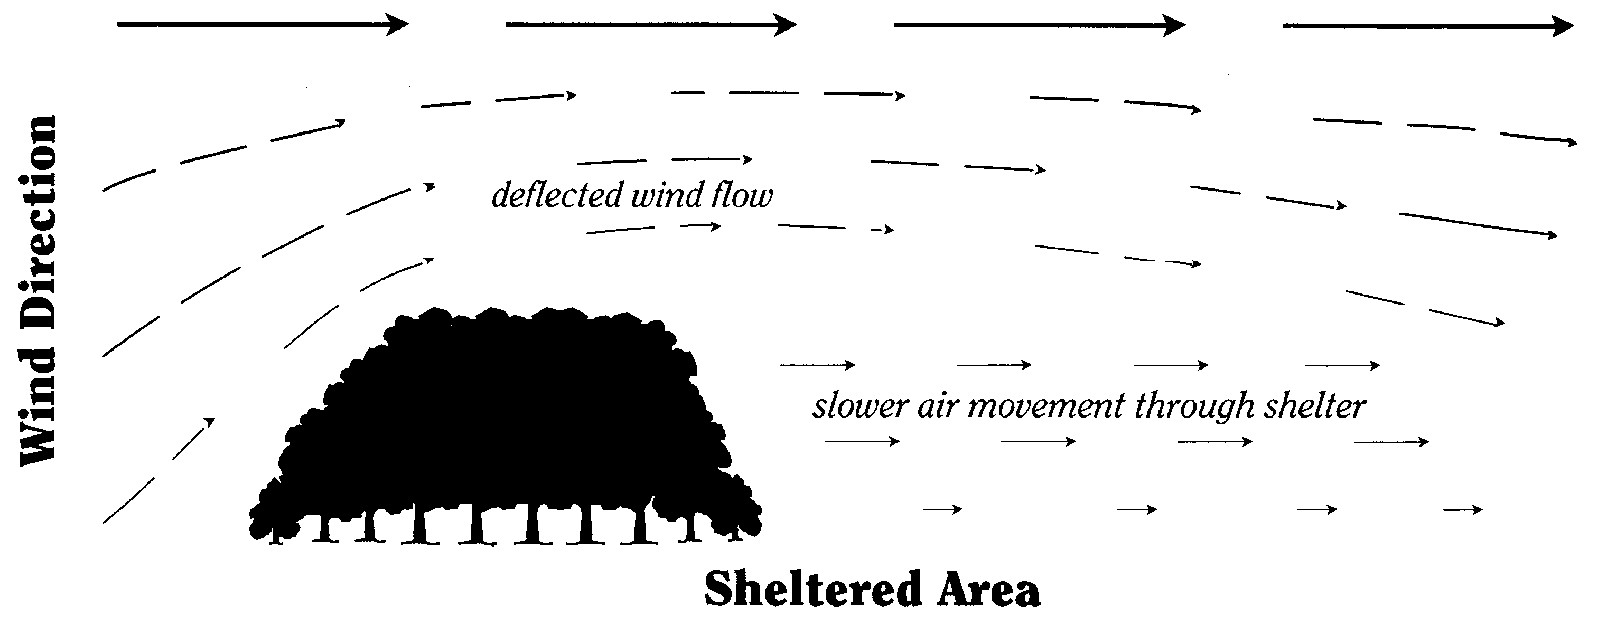 Illustration of wind flow and shelter created by a shelterbelt